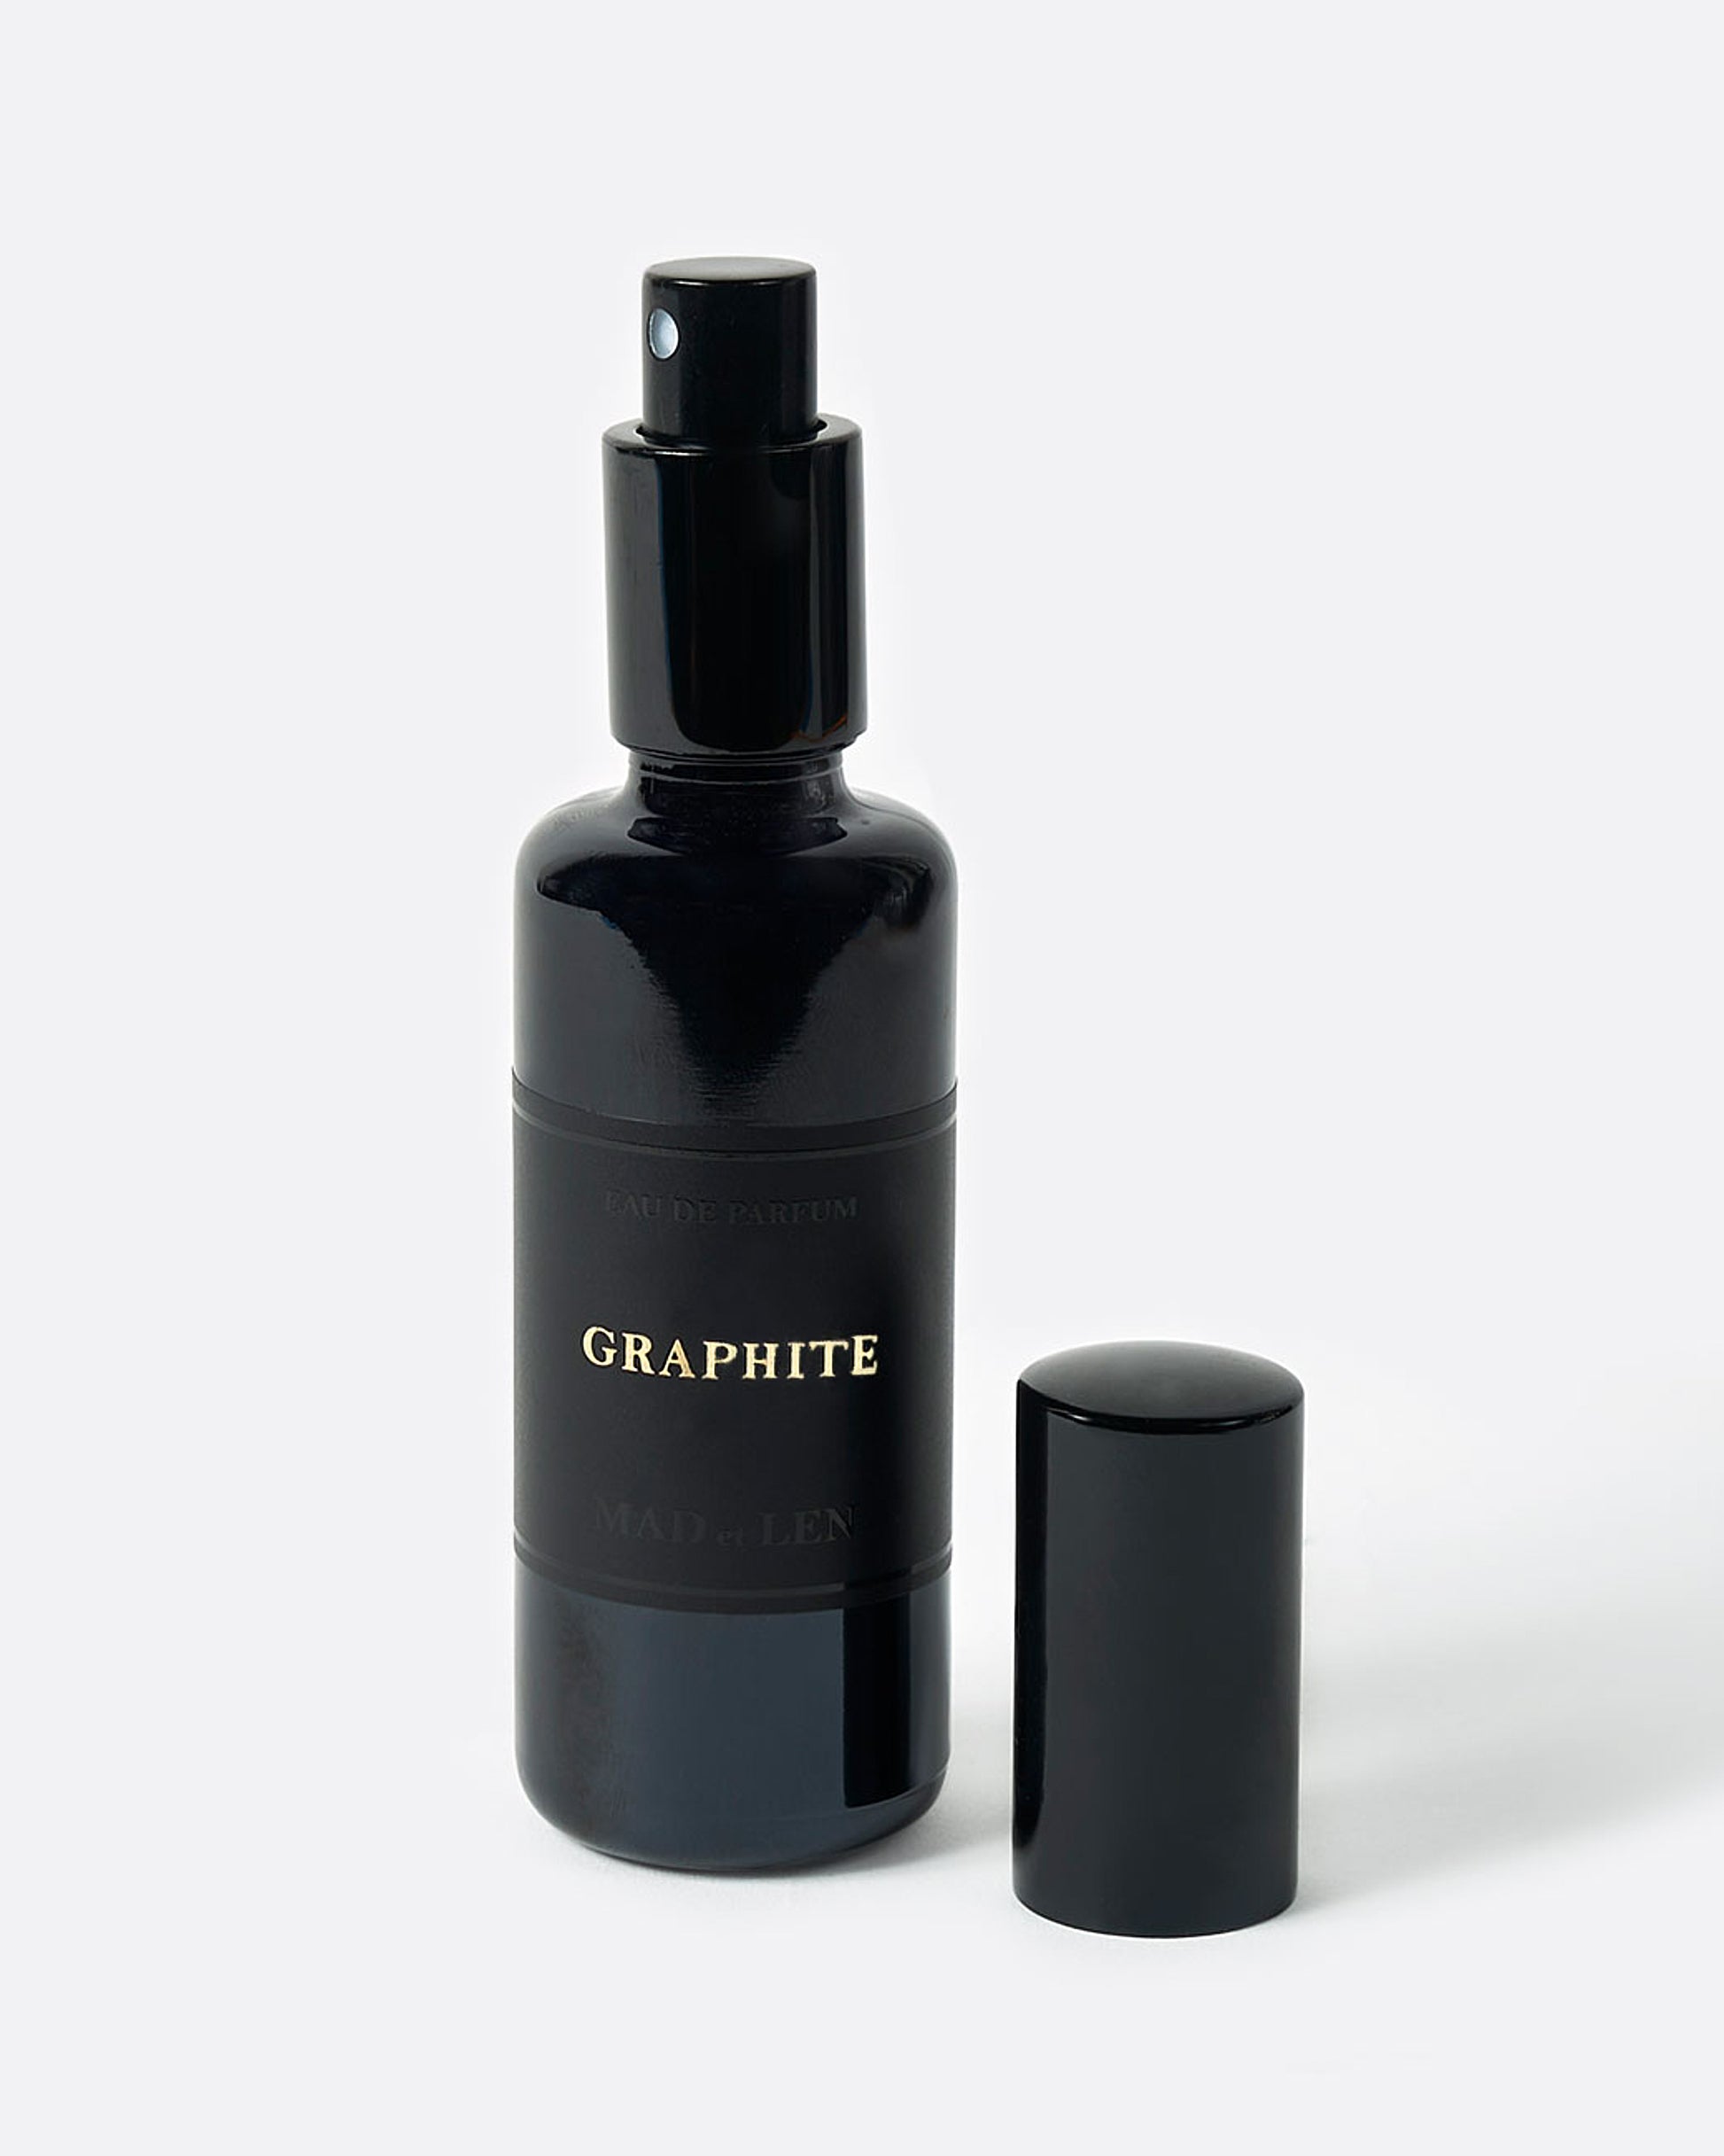 A bottle of Mad et Len's Graphite perfume with the lid off.